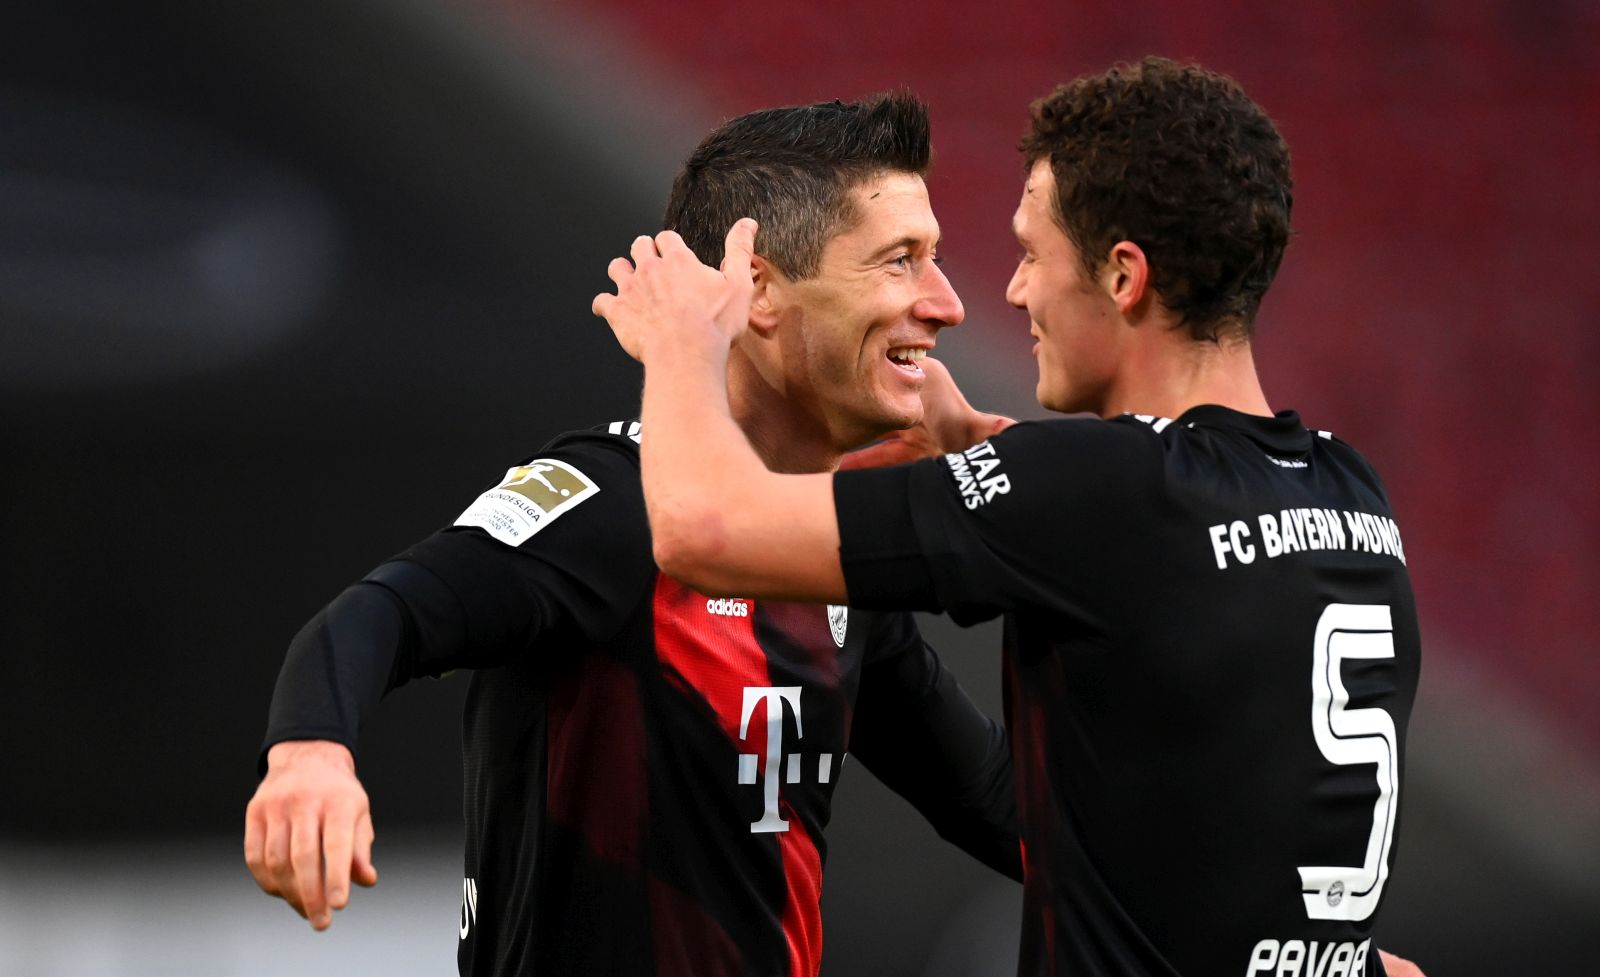 epa08848906 Robert Lewandowski (L) of Bayern Munich celebrates with teammate Benjamin Pavard (R) after scoring the 2-1 lead during the German Bundesliga soccer match between VfB Stuttgart and Bayern Munich in Stuttgart, Germany, 28 November 2020.  EPA/Matthias Hangst / POOL CONDITIONS - ATTENTION:  The DFL regulations prohibit any use of photographs as image sequences and/or quasi-video.